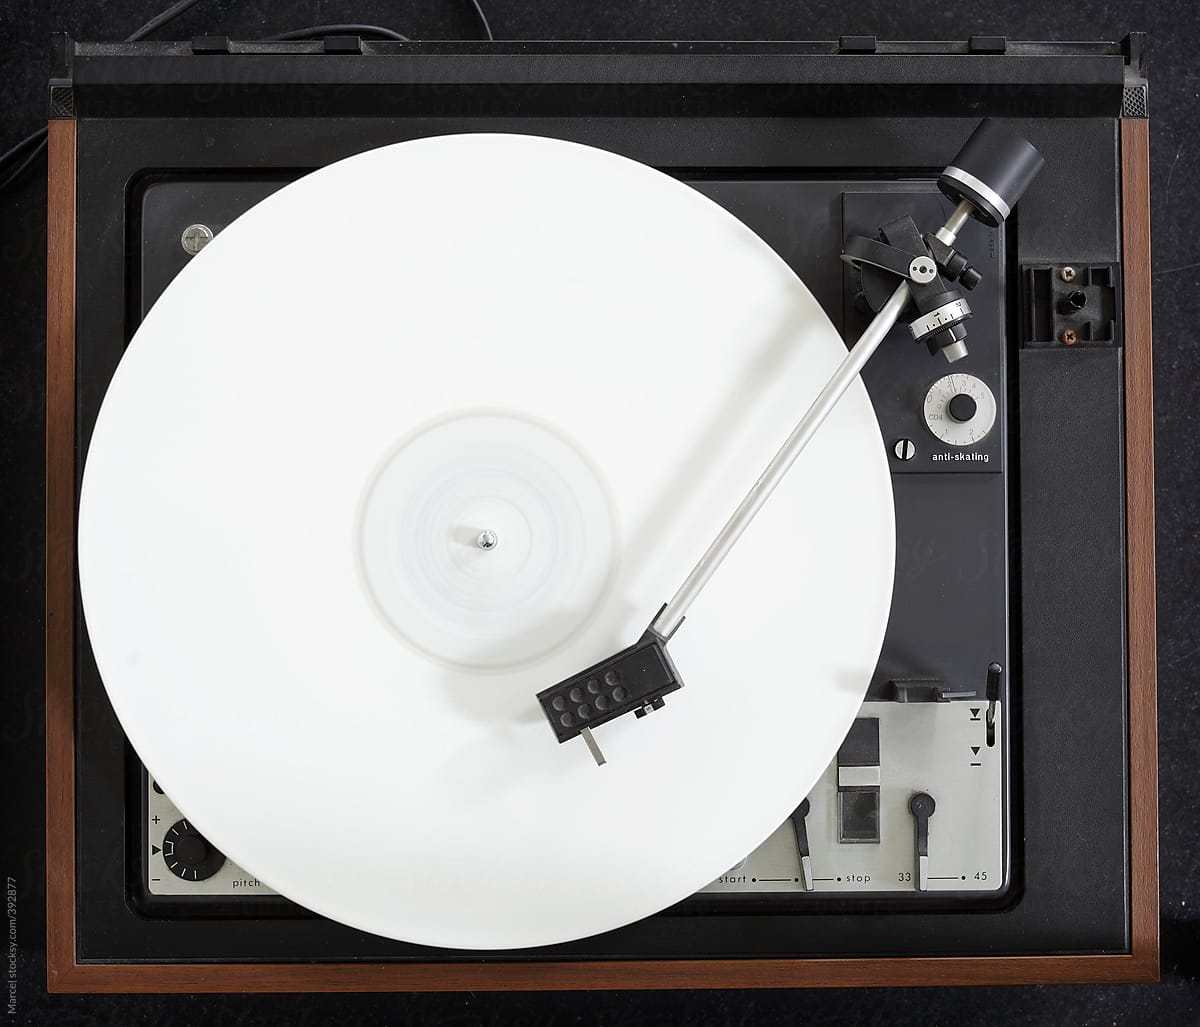 Vintage turntable with a white vinyl album playing